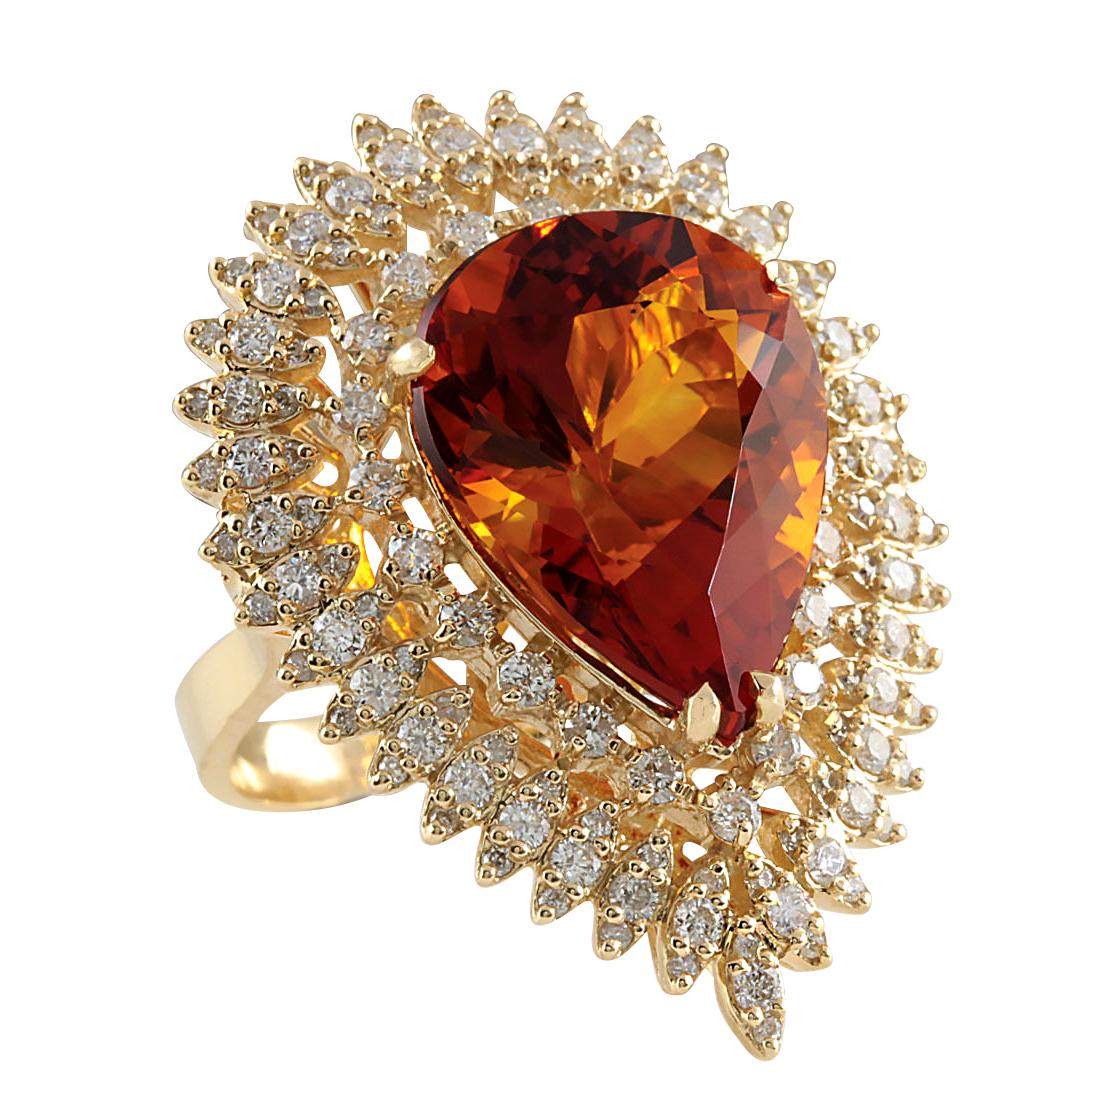 Introducing our exquisite 17.40 Carat Citrine Ring, elegantly crafted in 14K Yellow Gold. Each facet of this stunning piece is stamped with authenticity, showcasing a total ring weight of 14.8 grams. At its heart lies a mesmerizing citrine gemstone,